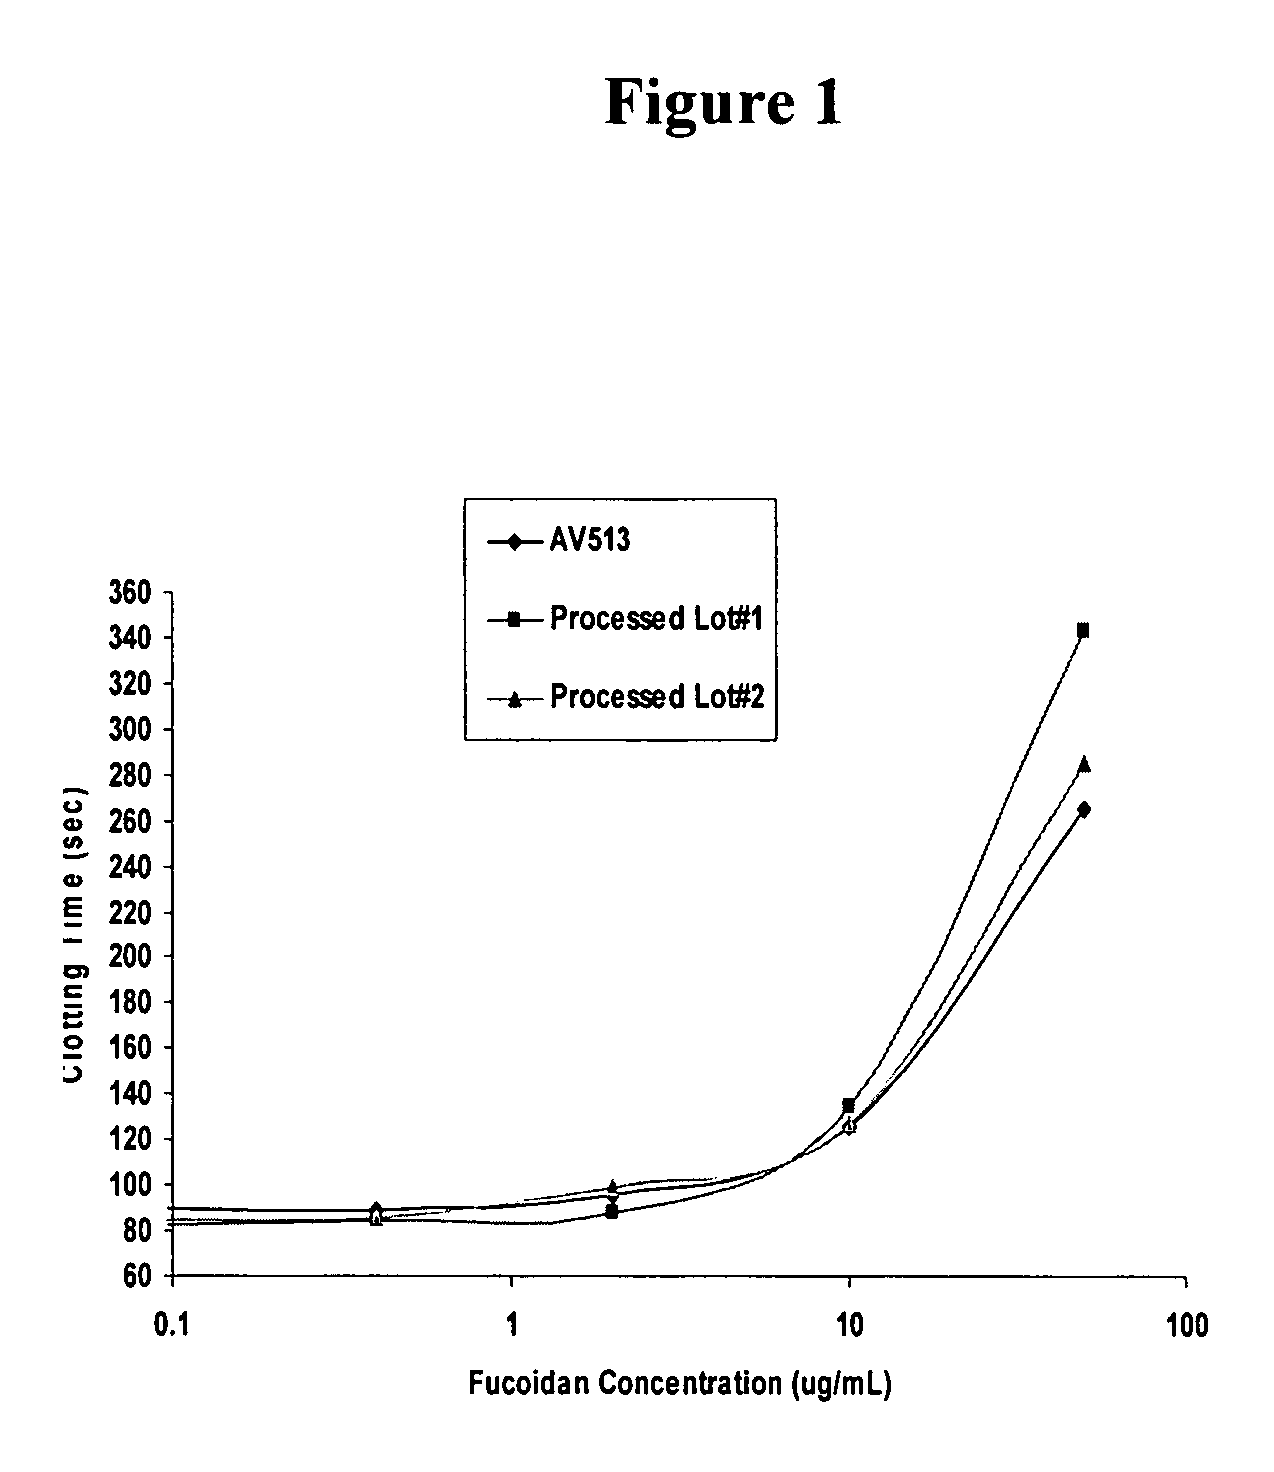 Methods for fucoidan purification from sea weed extracts